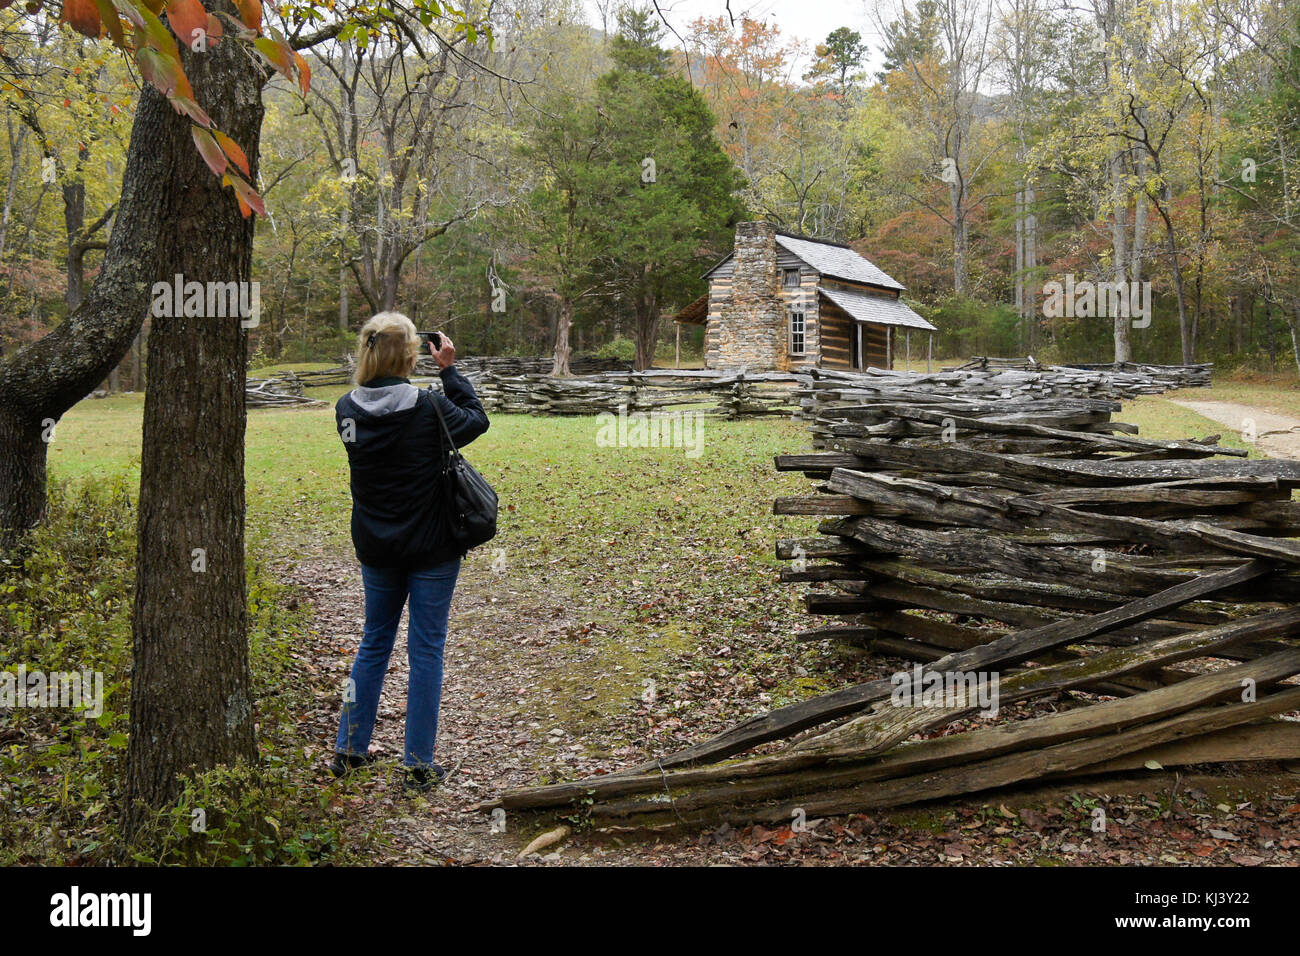 Woman photographing the historic John Oliver Cabin in autumn, Cades Cove, Great Smoky Mountains National Park, Tennessee Stock Photo